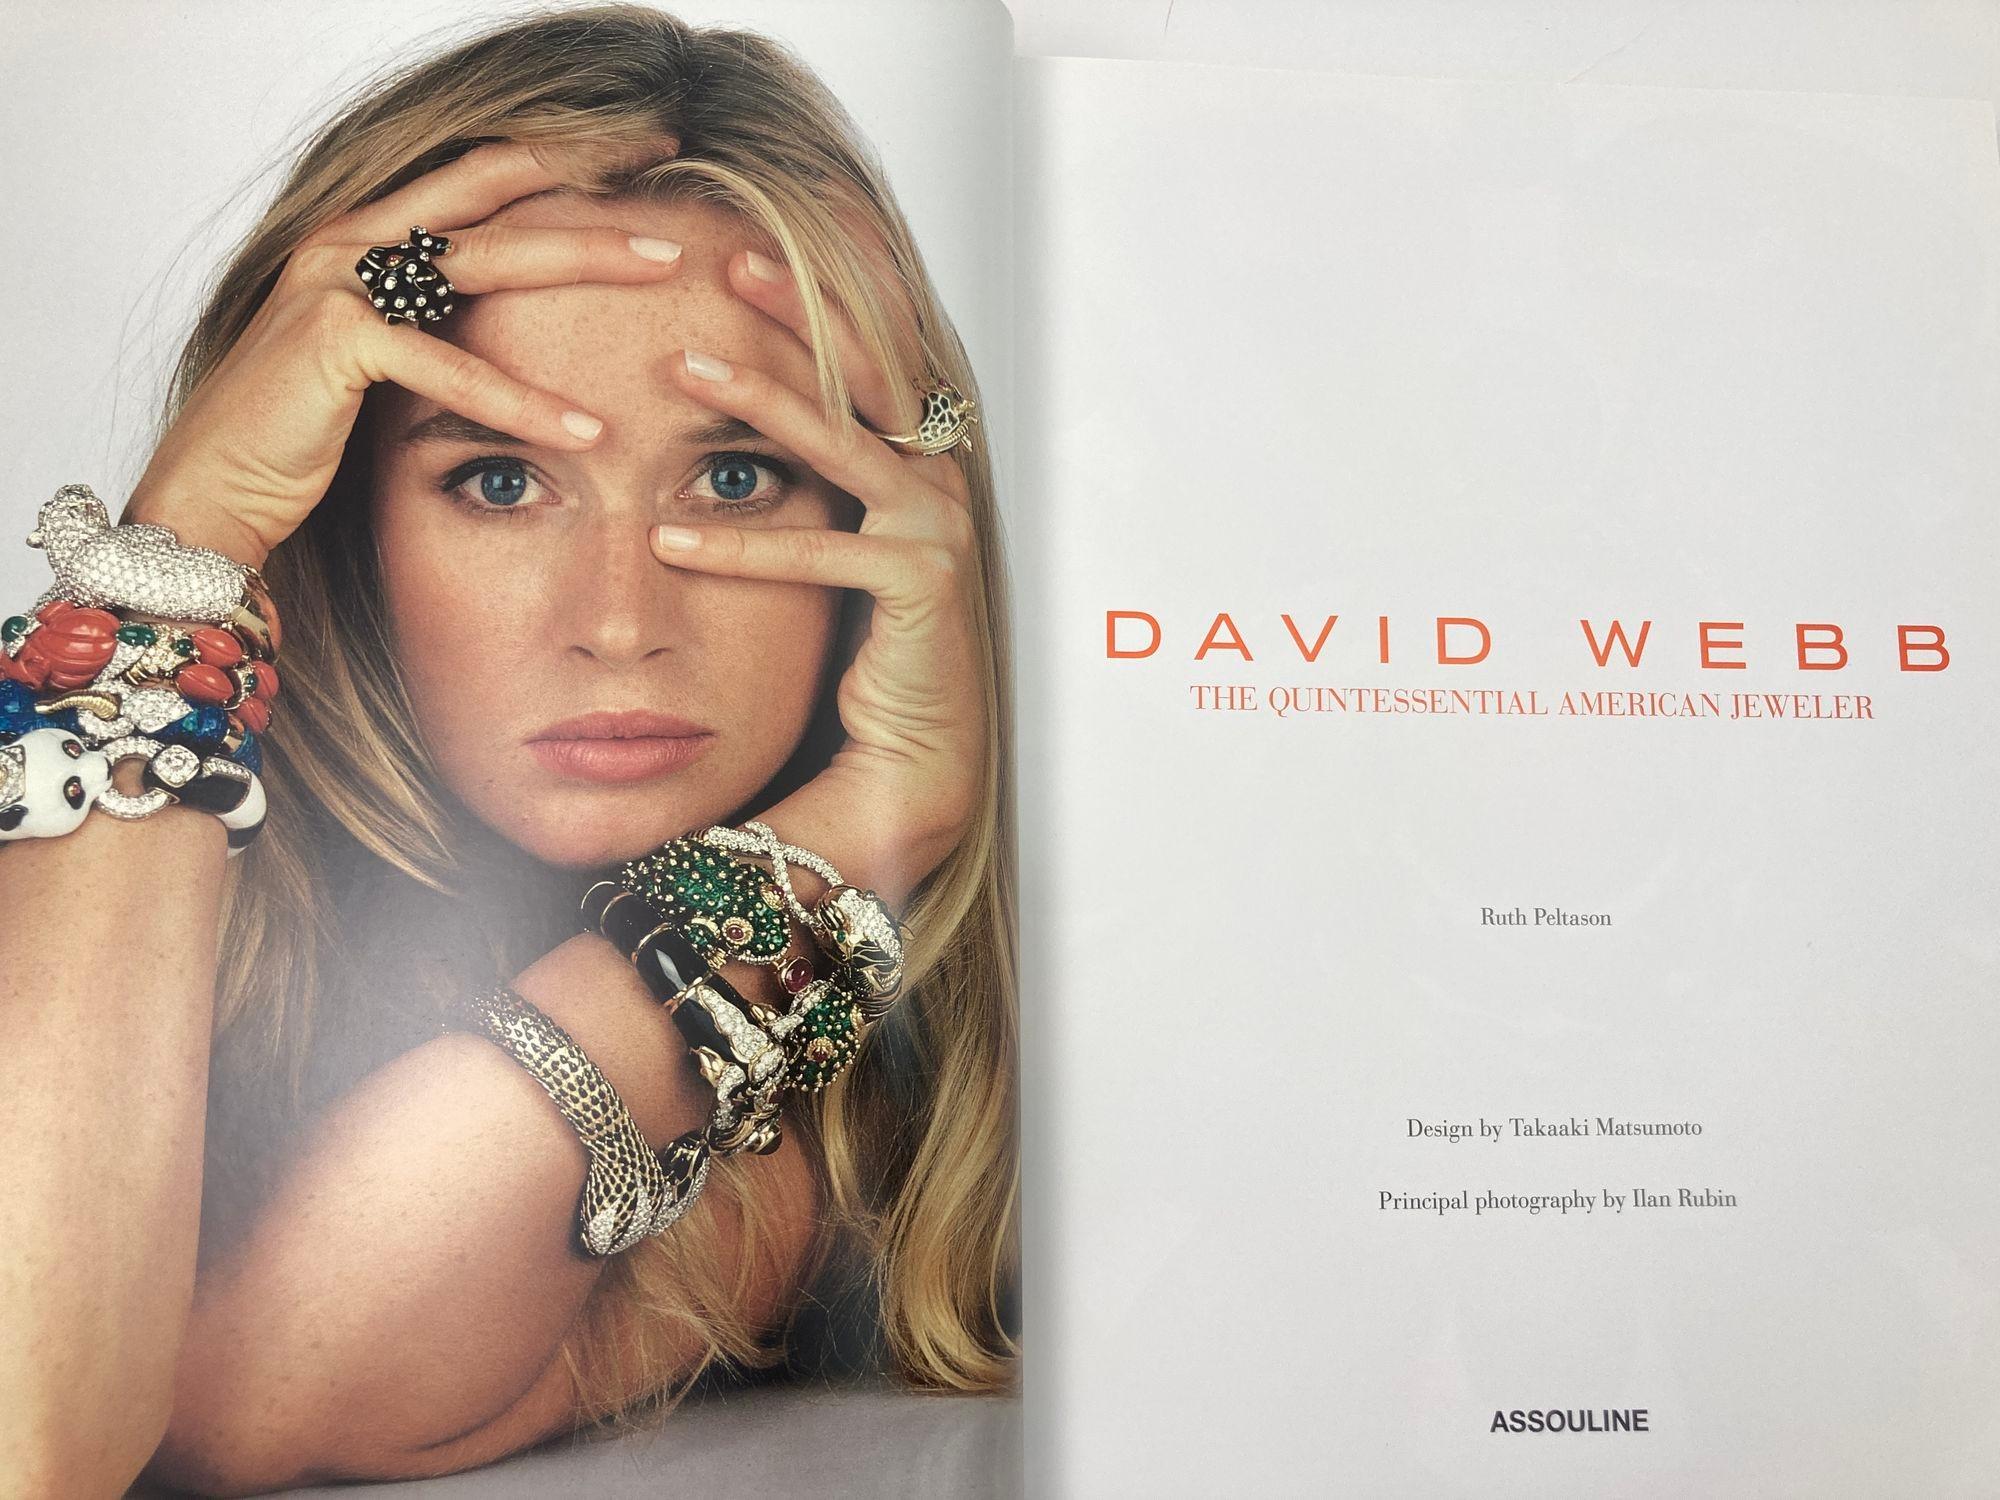 Paper David Webb The Quintessential American Jeweler Hardcover Book by Ruth Peltason For Sale